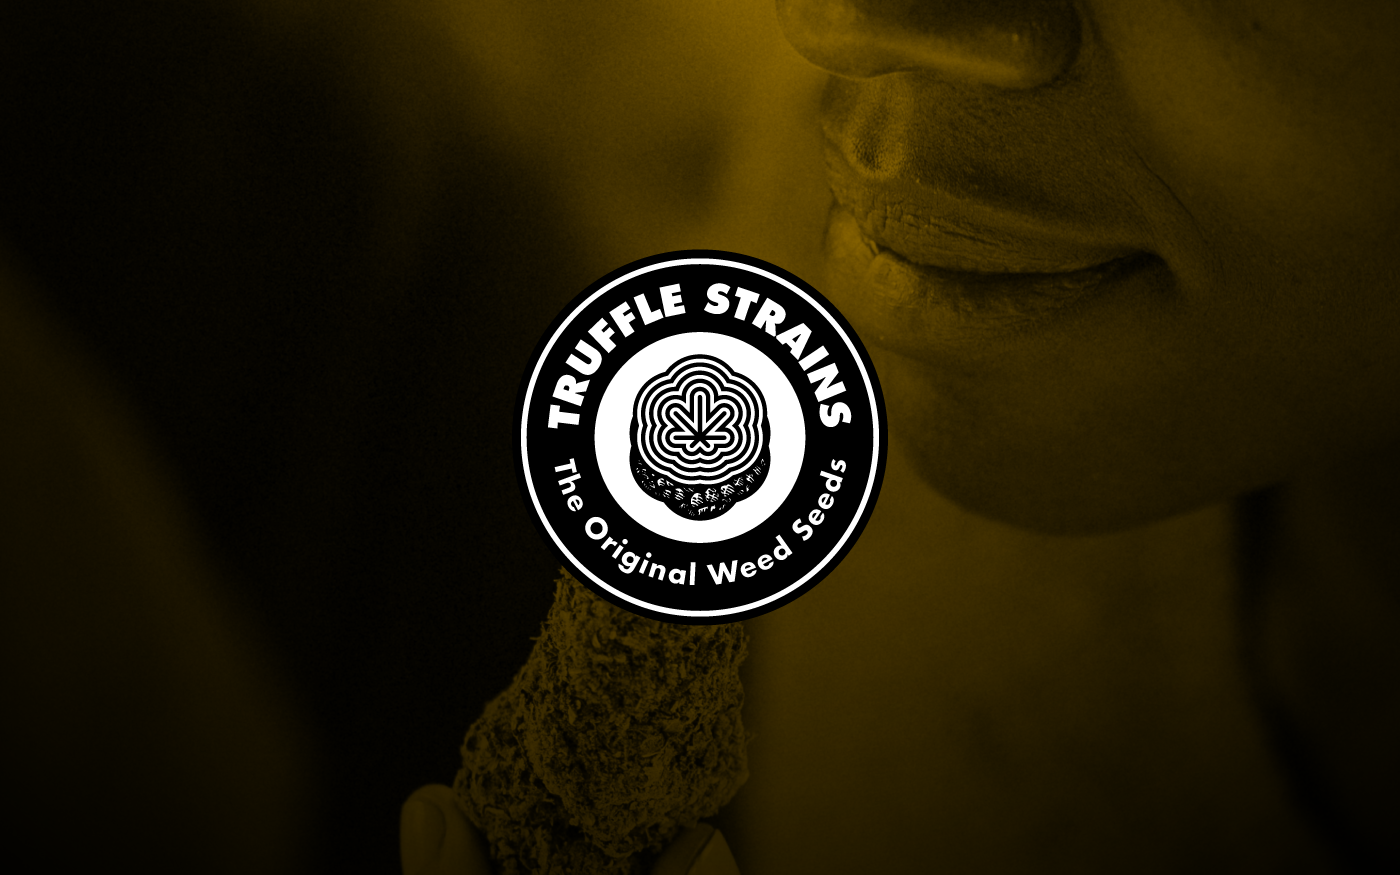 Truffle Strains logo in white on a photograph of a person smelling a bud.